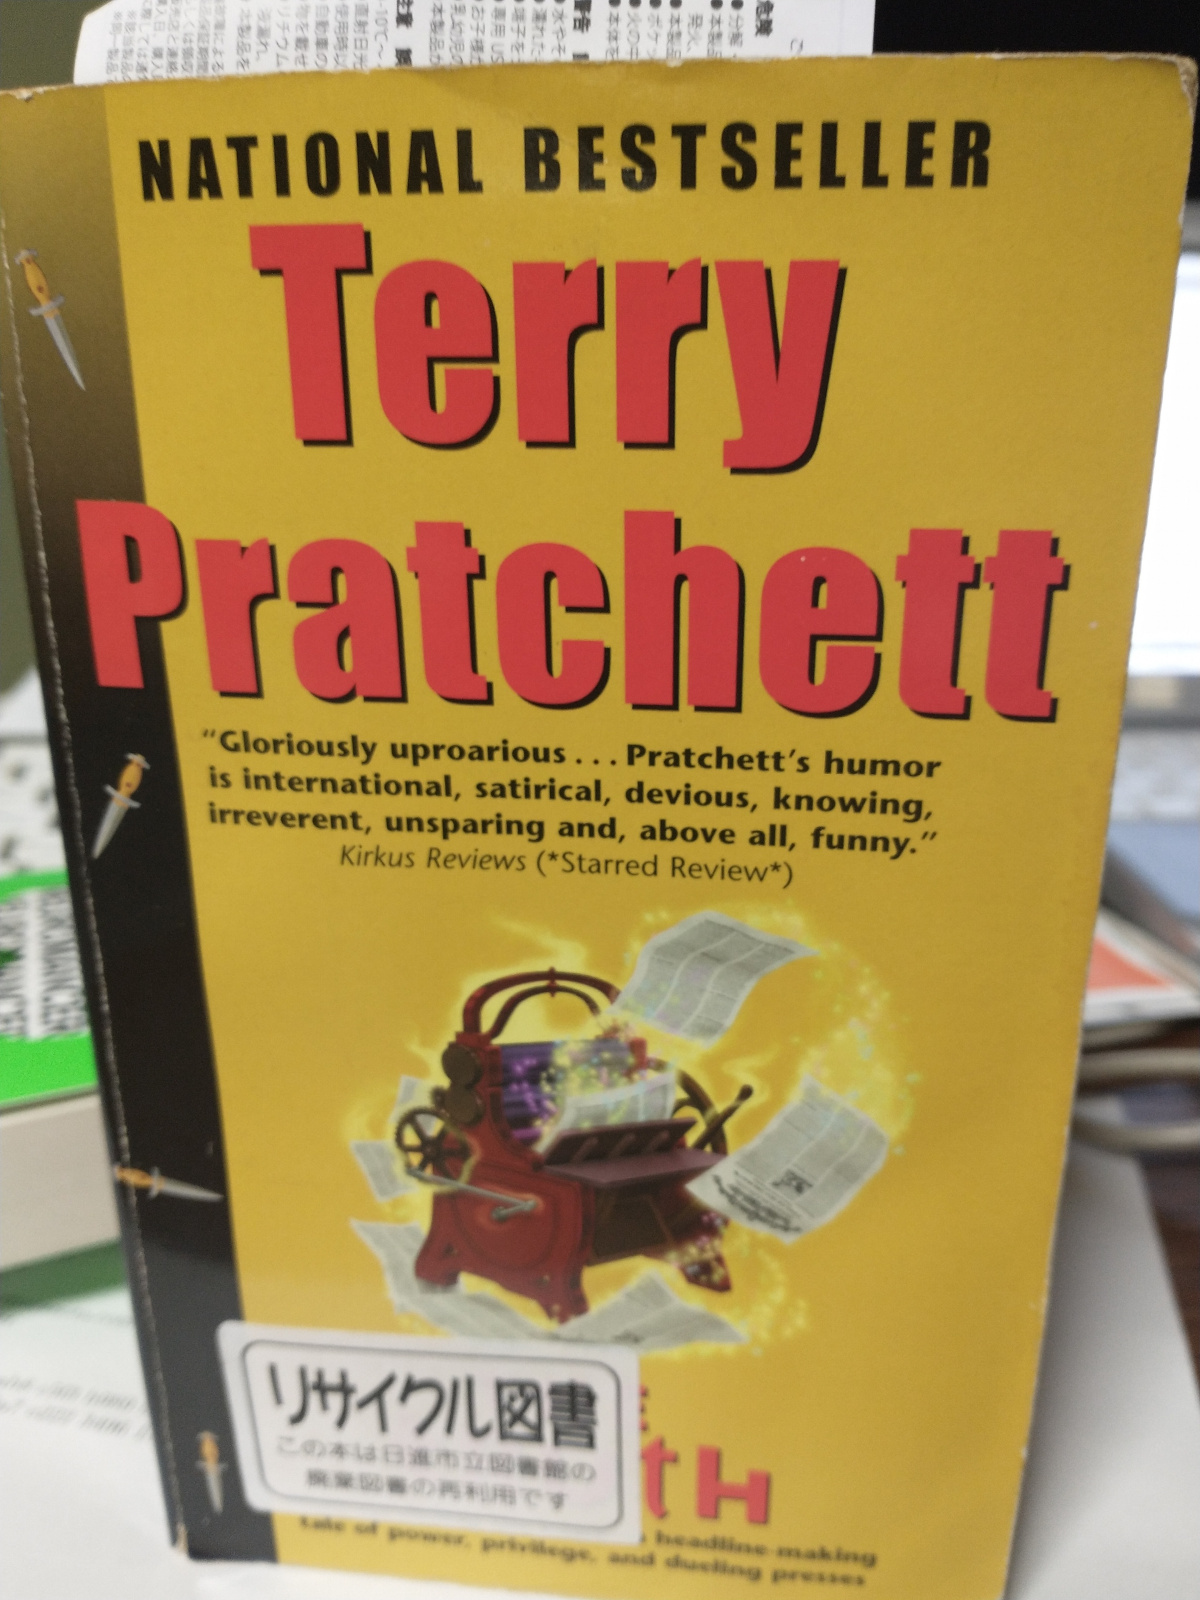 A copy of “The Truth,” a novel by Terry Pratchett, with a sticker over the title reading (in English translation): “Recycle Book/This is a book for reuse, culled from the Nisshin City Library